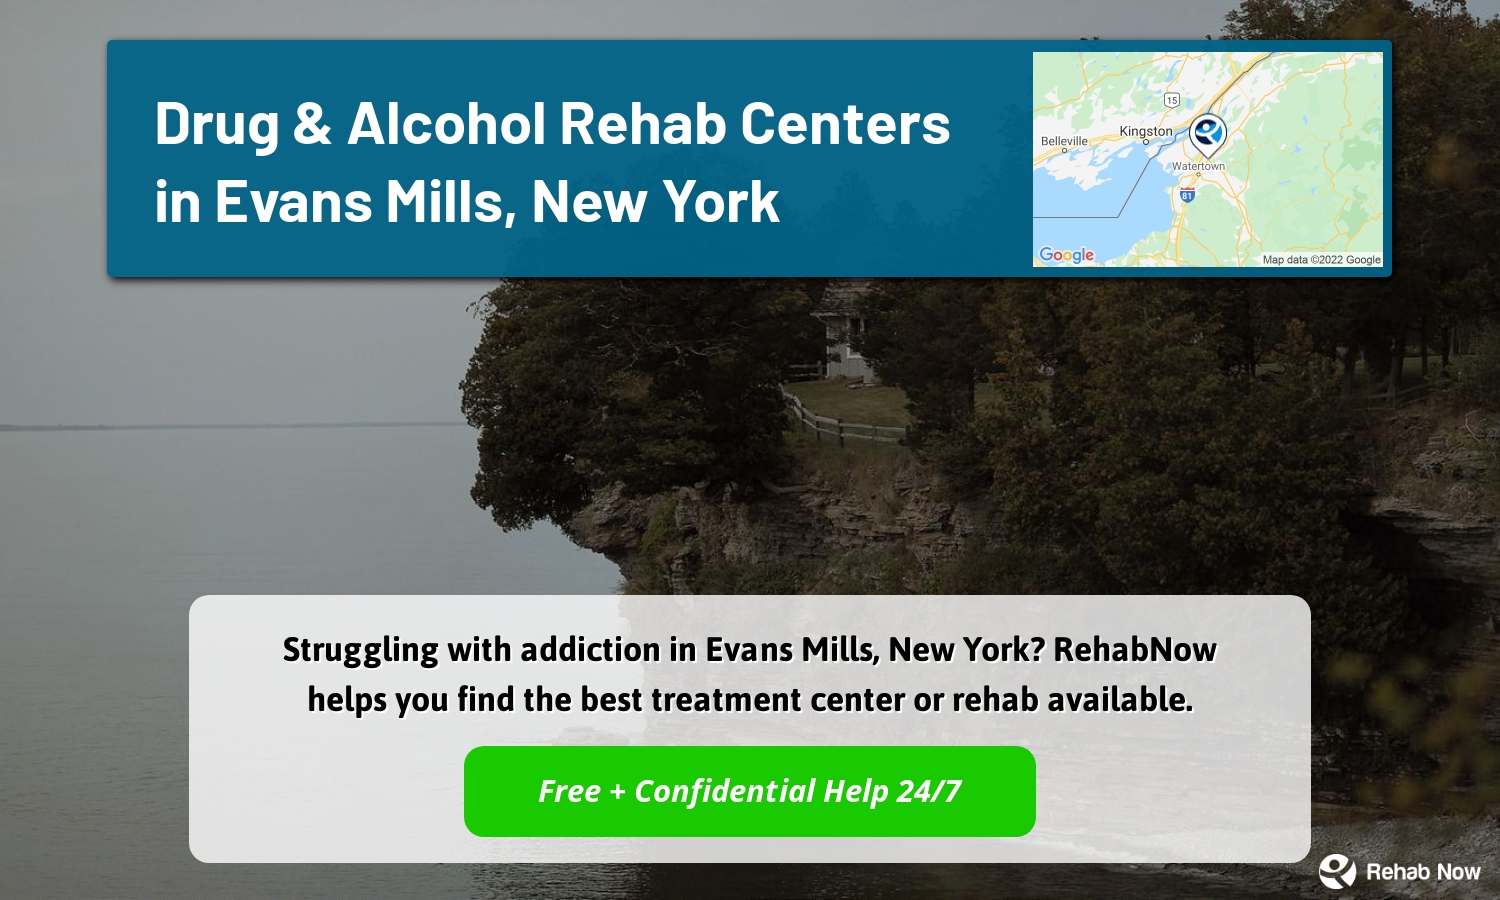 Struggling with addiction in Evans Mills, New York? RehabNow helps you find the best treatment center or rehab available.